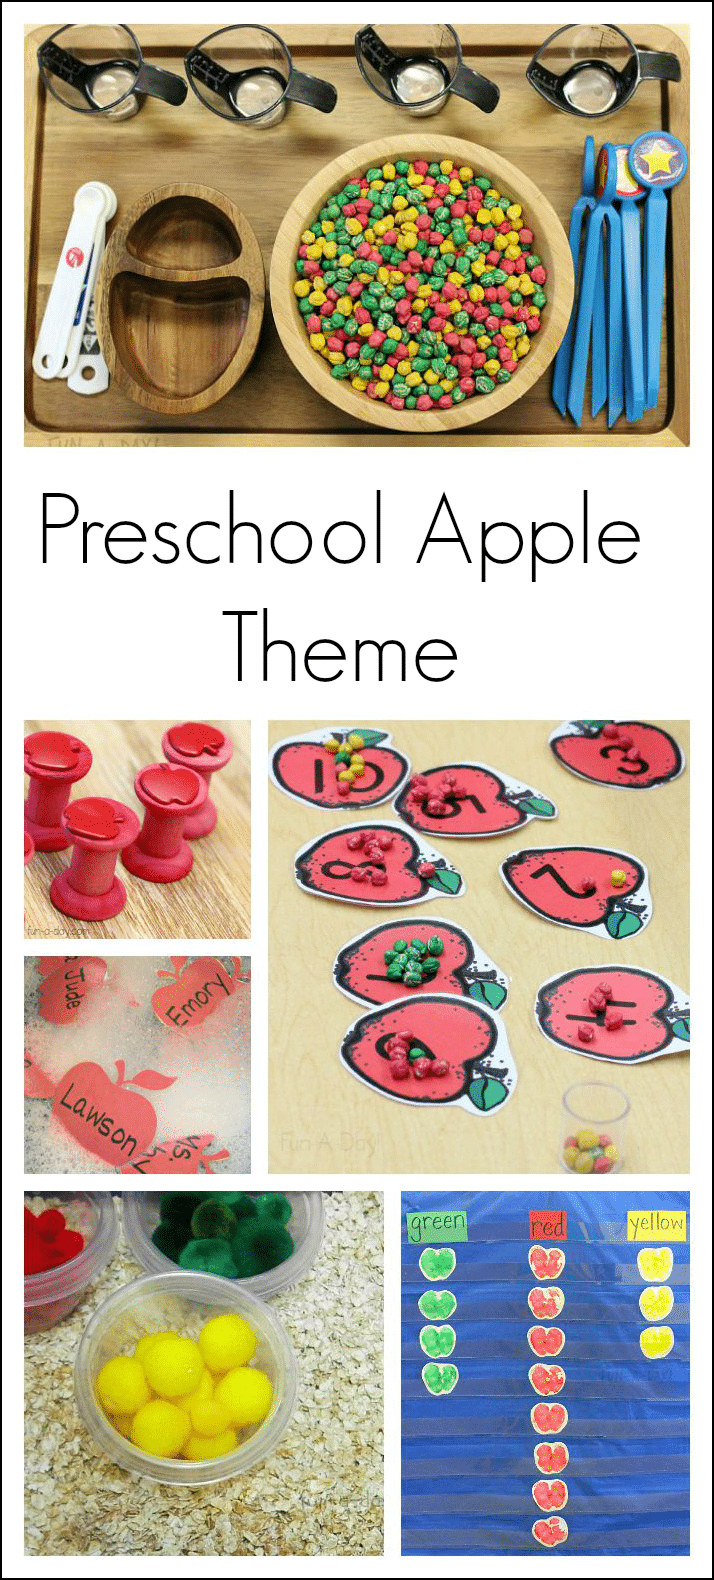 So Many Activities for a Kindergarten or Preschool Apple Theme FunADay!